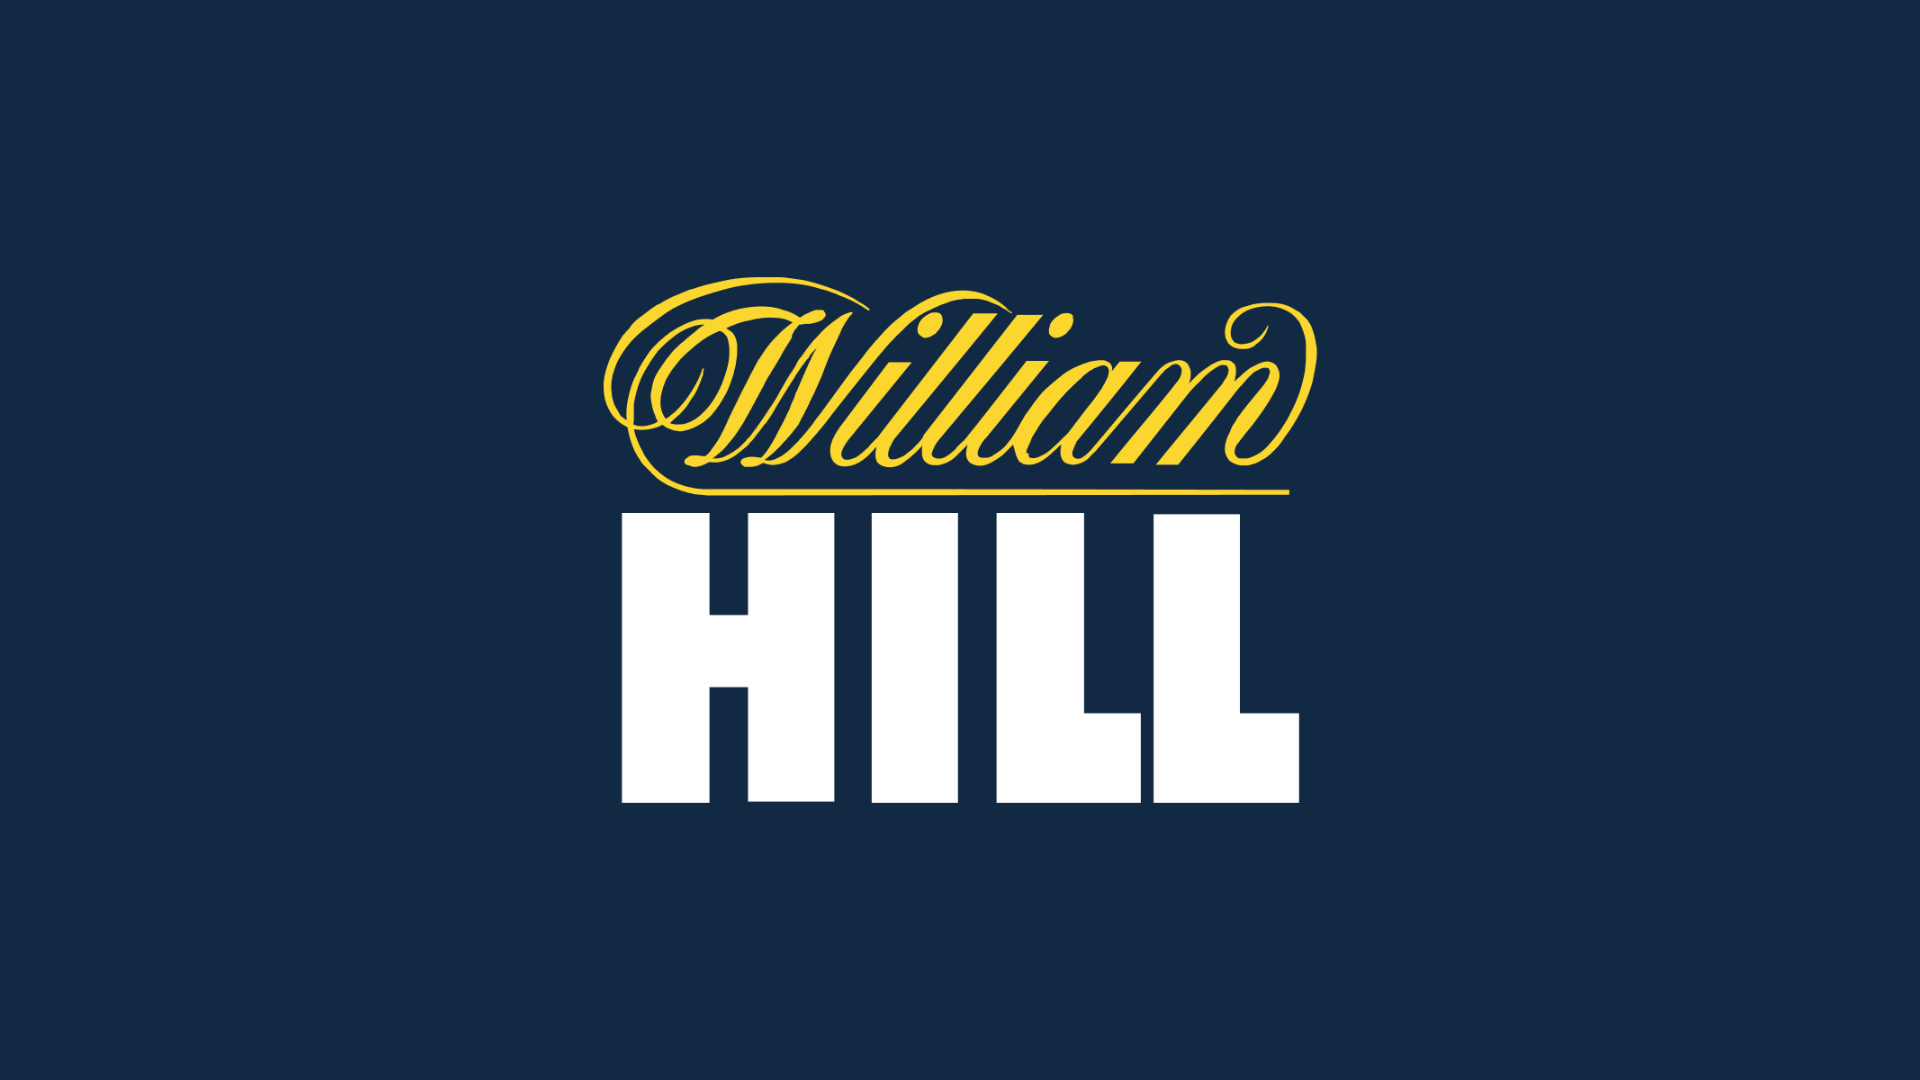 Euro 2024 William Hill Promo Code Sign Up Offer – Get £60 in Free Bets and Bonuses